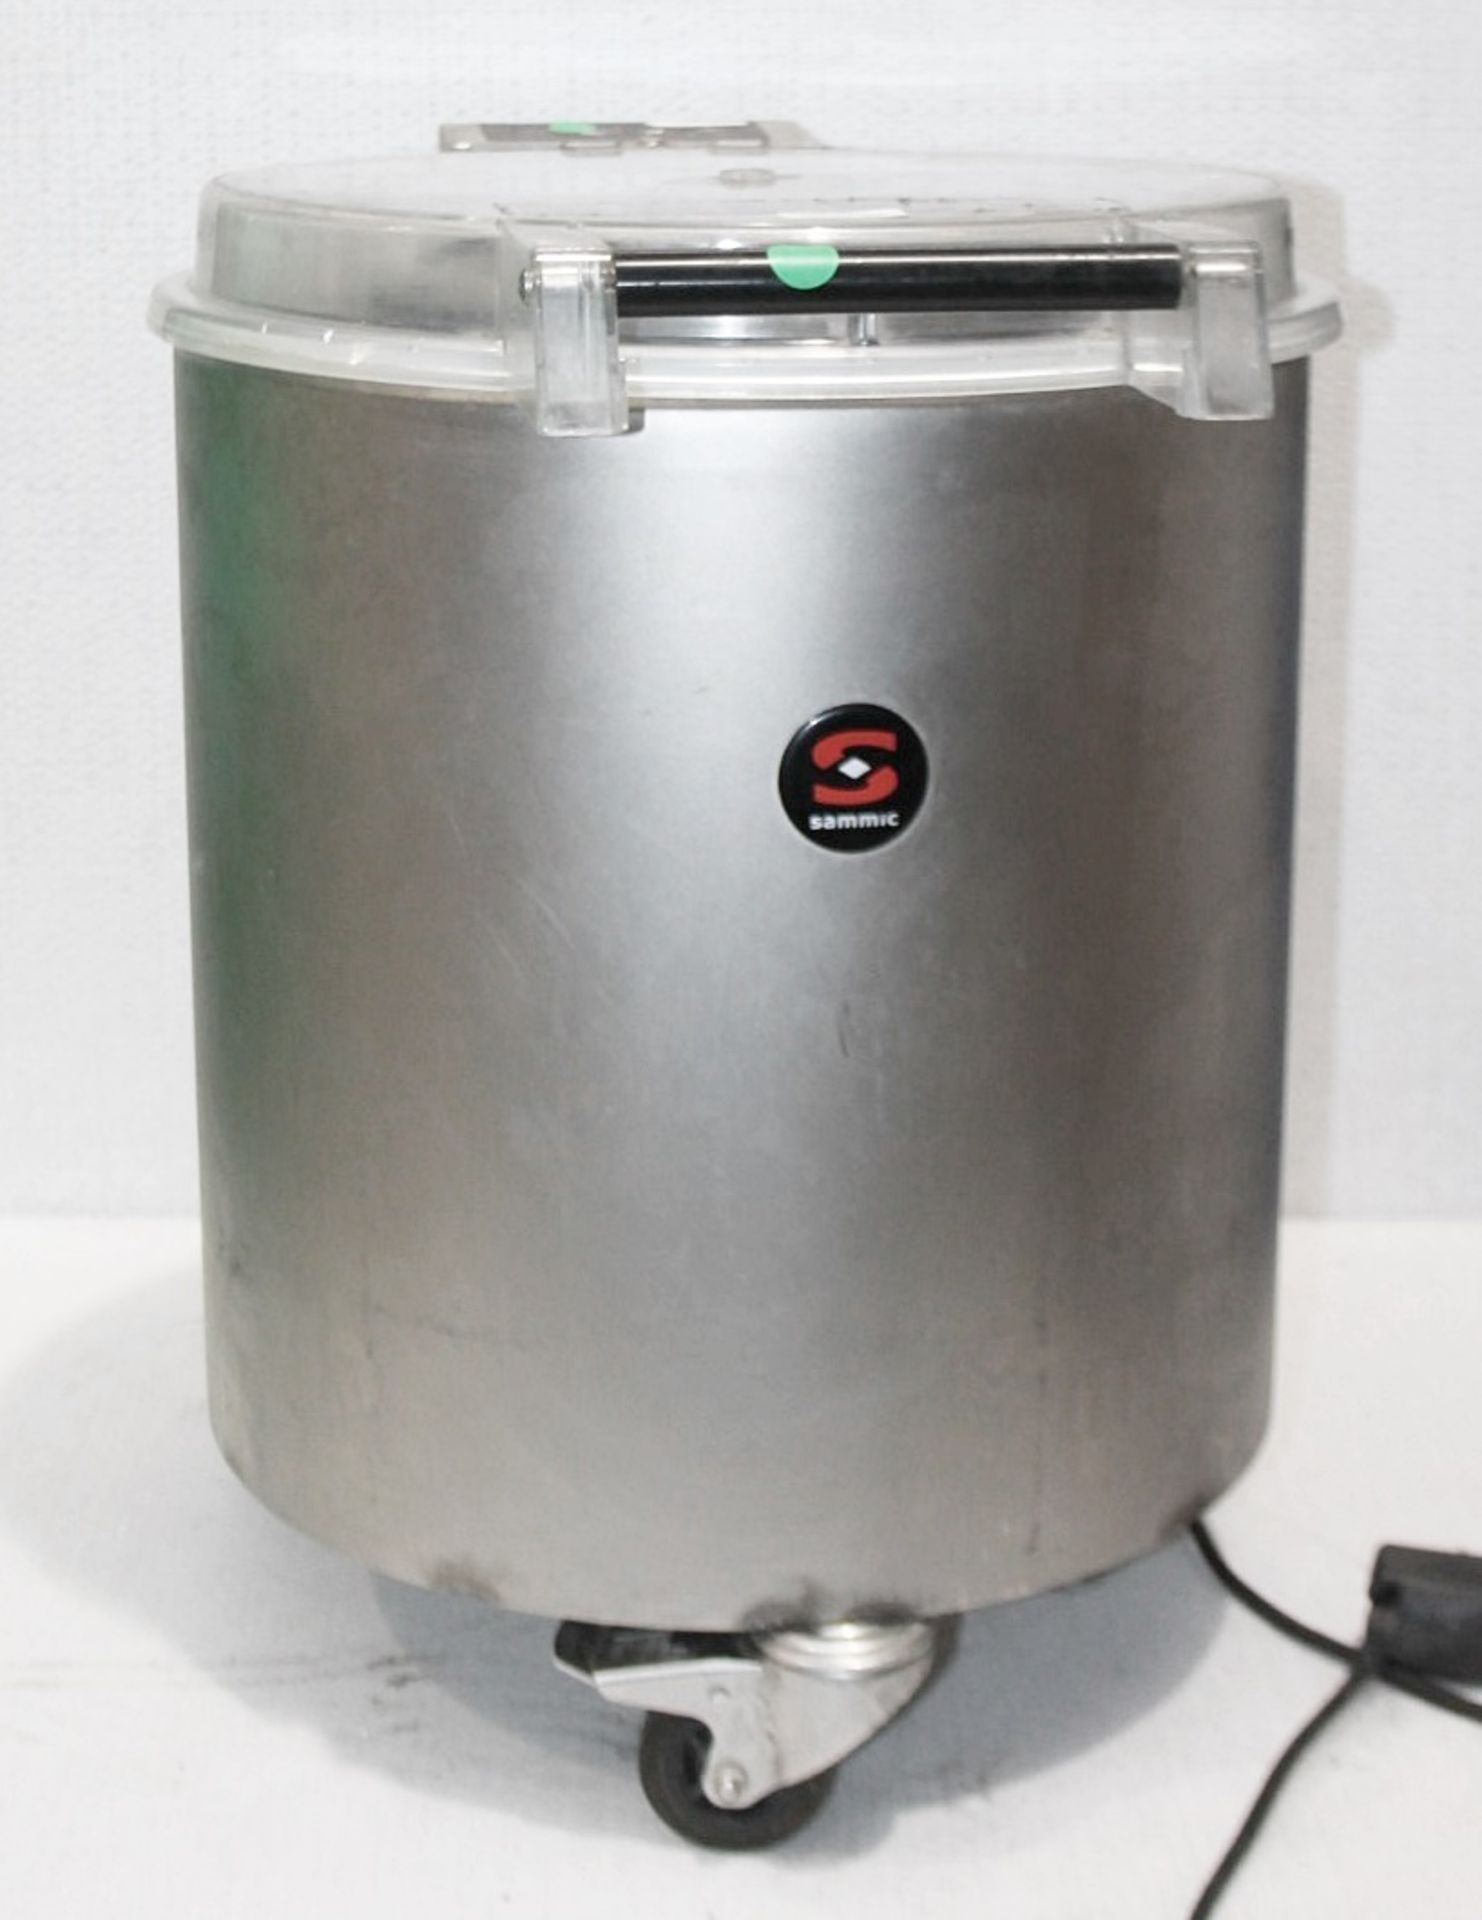 1 x Sammic ES-100 Commercial Salad or Vegetable Spinner Dryer With a 6kg Capacity - RRP £2,075 - Image 2 of 9